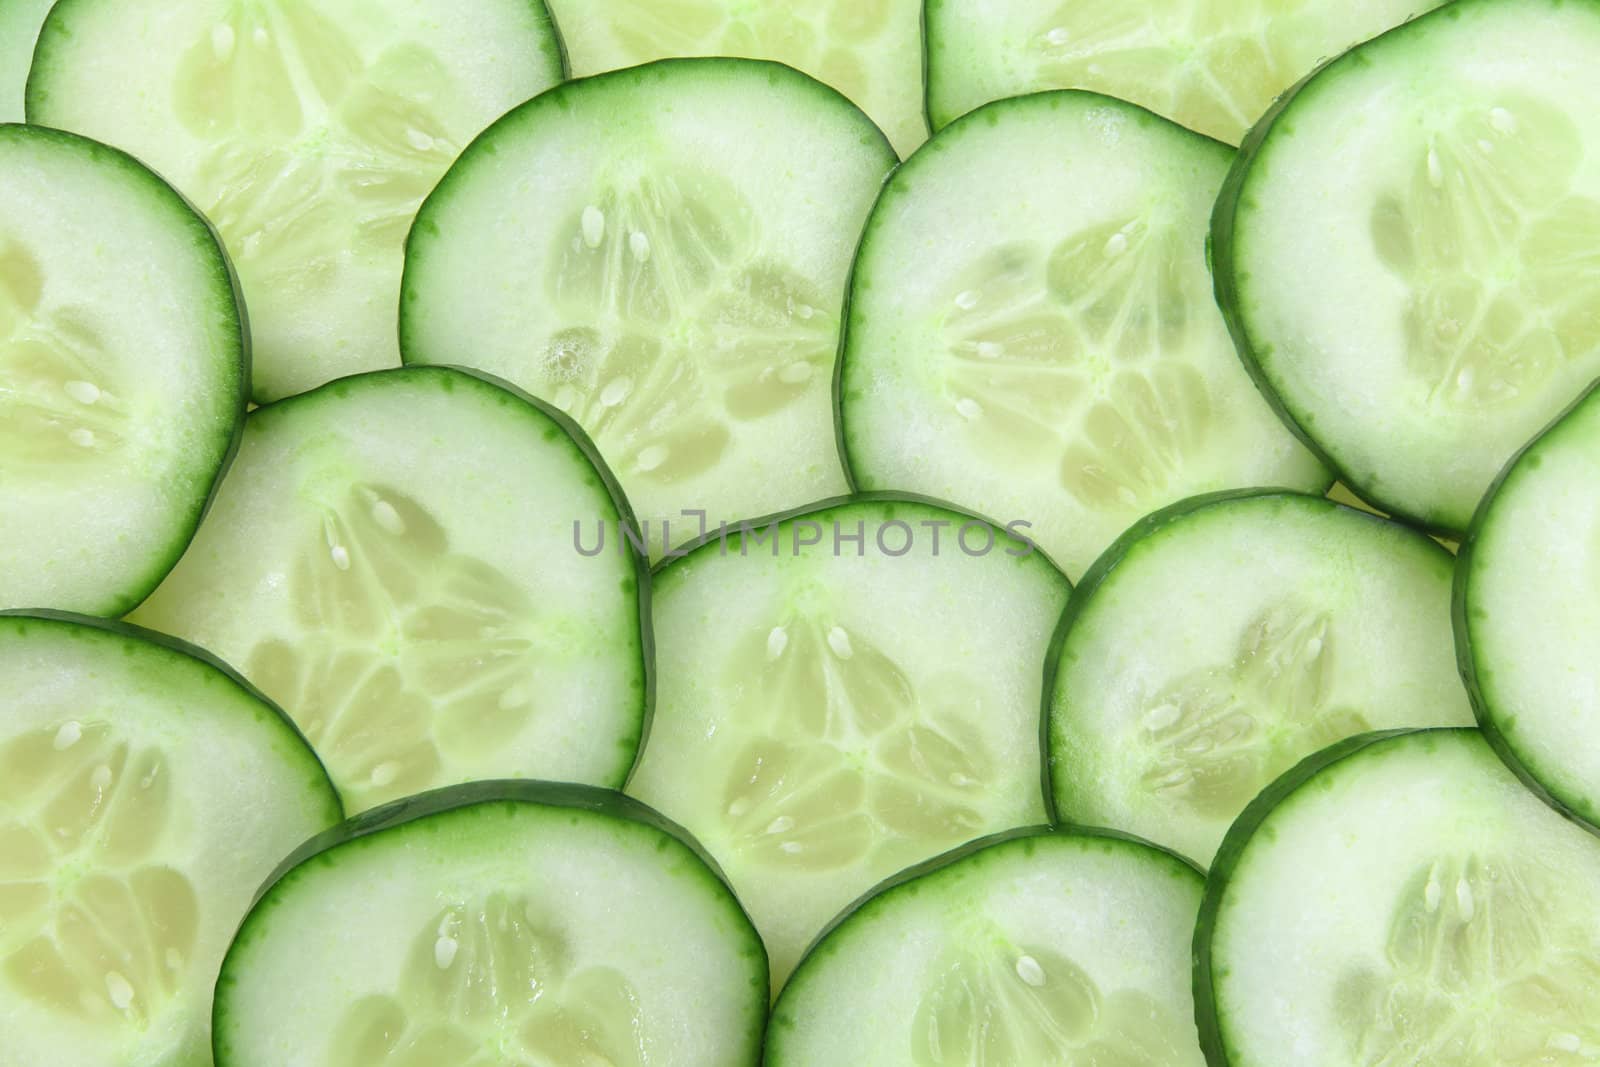 Photo of cucumber slices as a background.